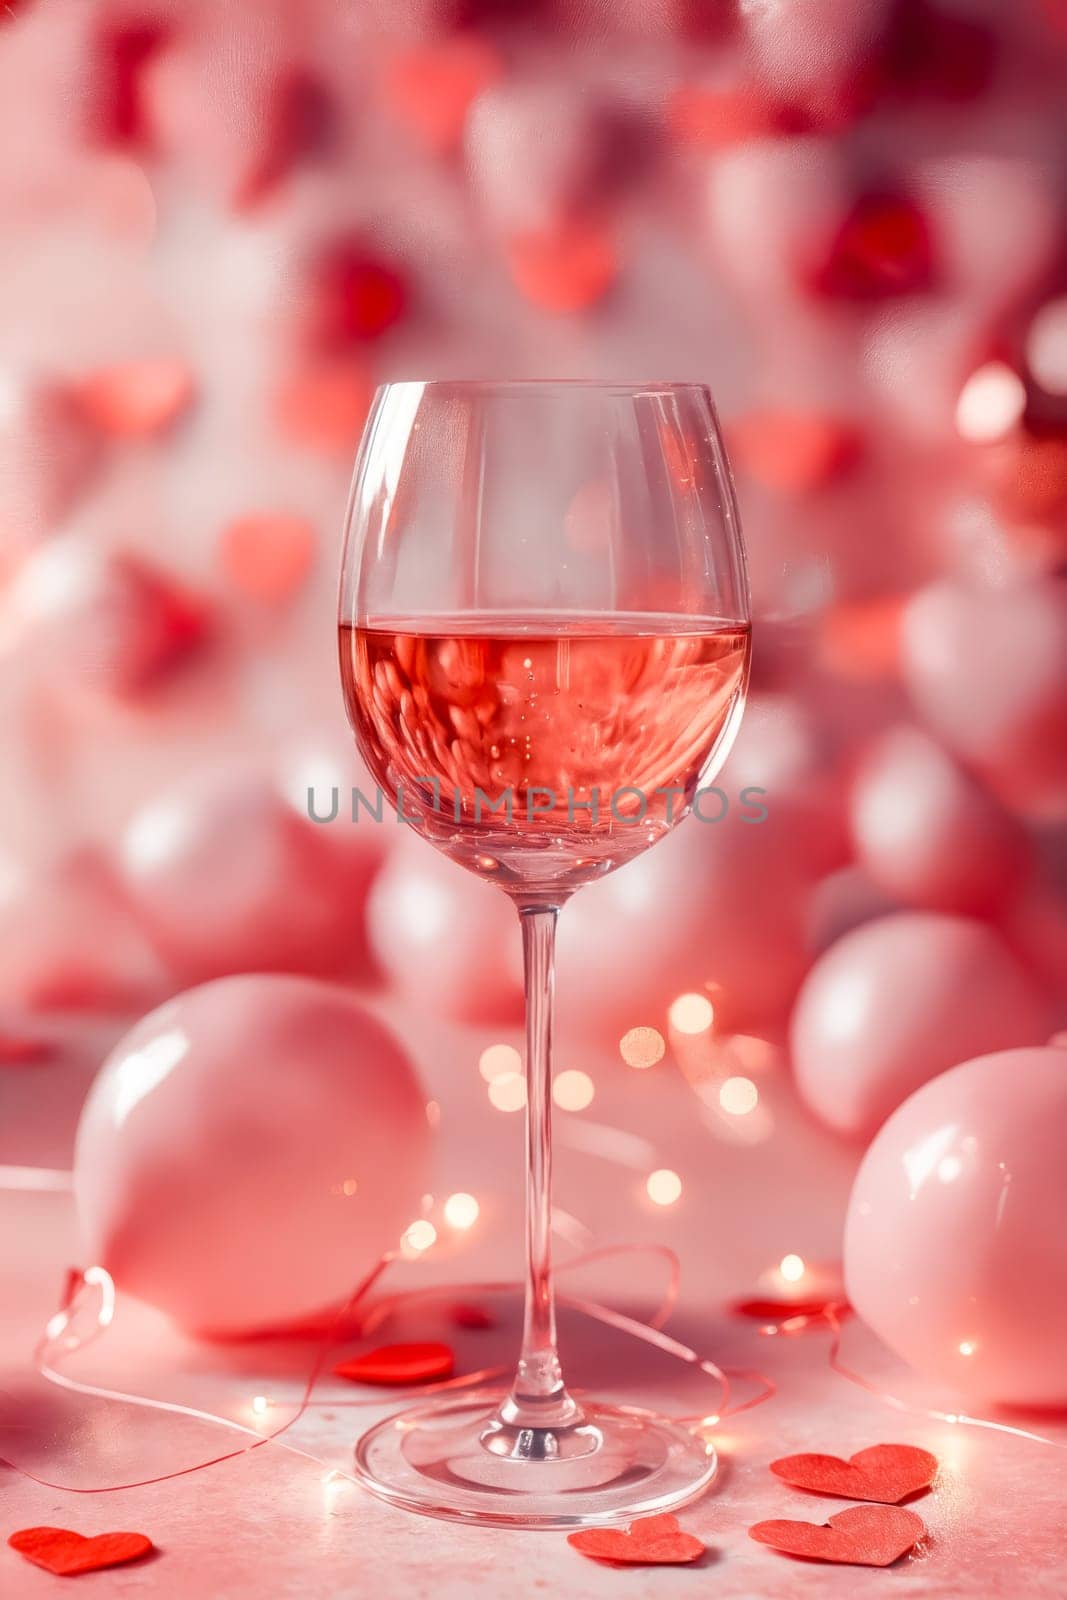 A glass of wine is sitting on a table with pink balloons and heart-shaped confetti. Concept of celebration and romance, as the wine glass and balloons are often associated with Valentine's Day. Generative AI